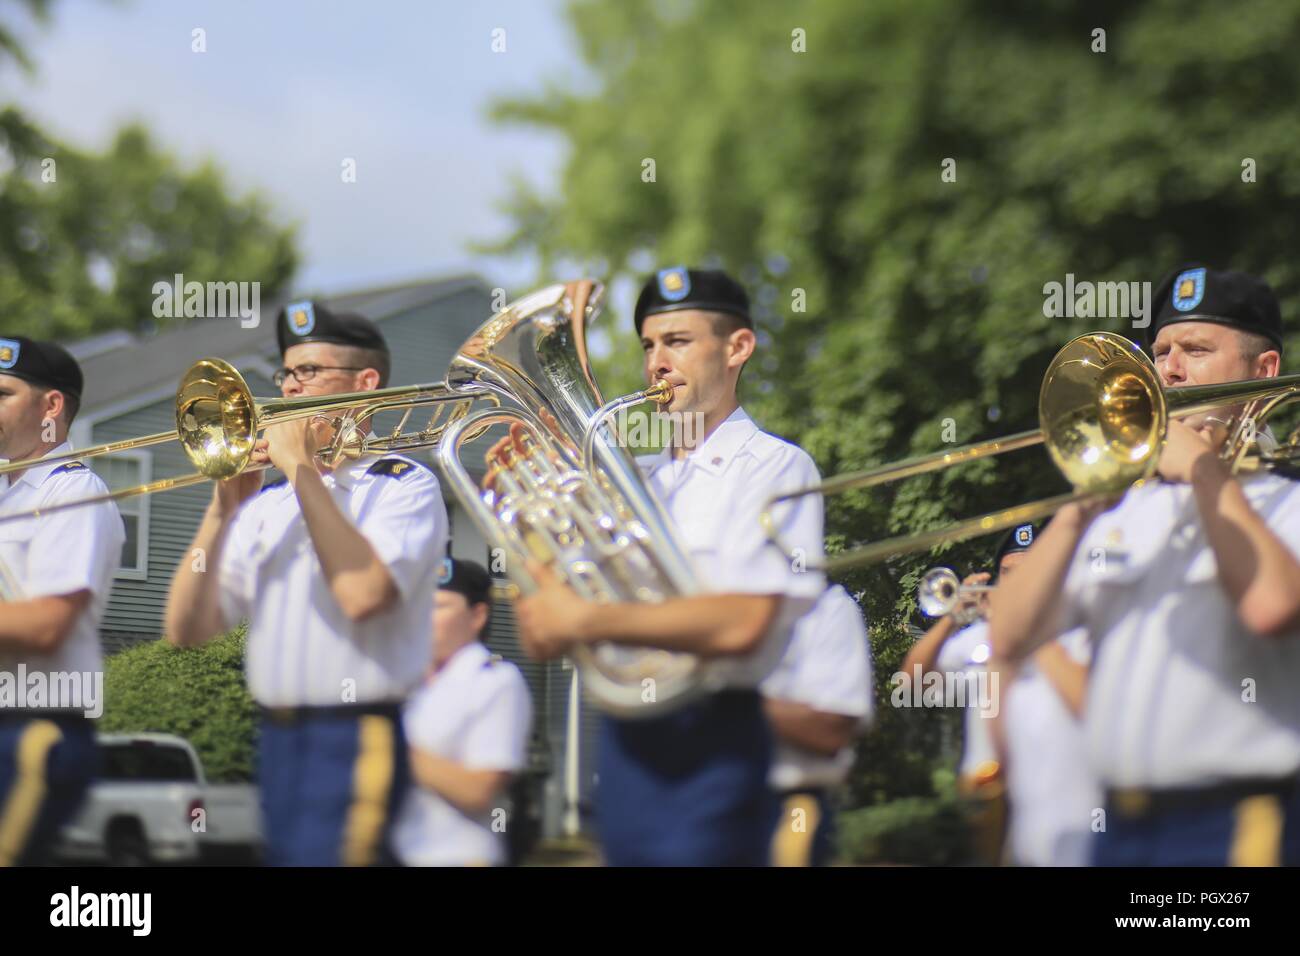 New Jersey National Guard's 63rd Army Band soldiers performing in the Historic Smithville Fourth of July parade, Smithville, New Jersey, July 4, 2018. Image courtesy Master Sgt. Matt Hecht / New Jersey National Guard. () Stock Photo